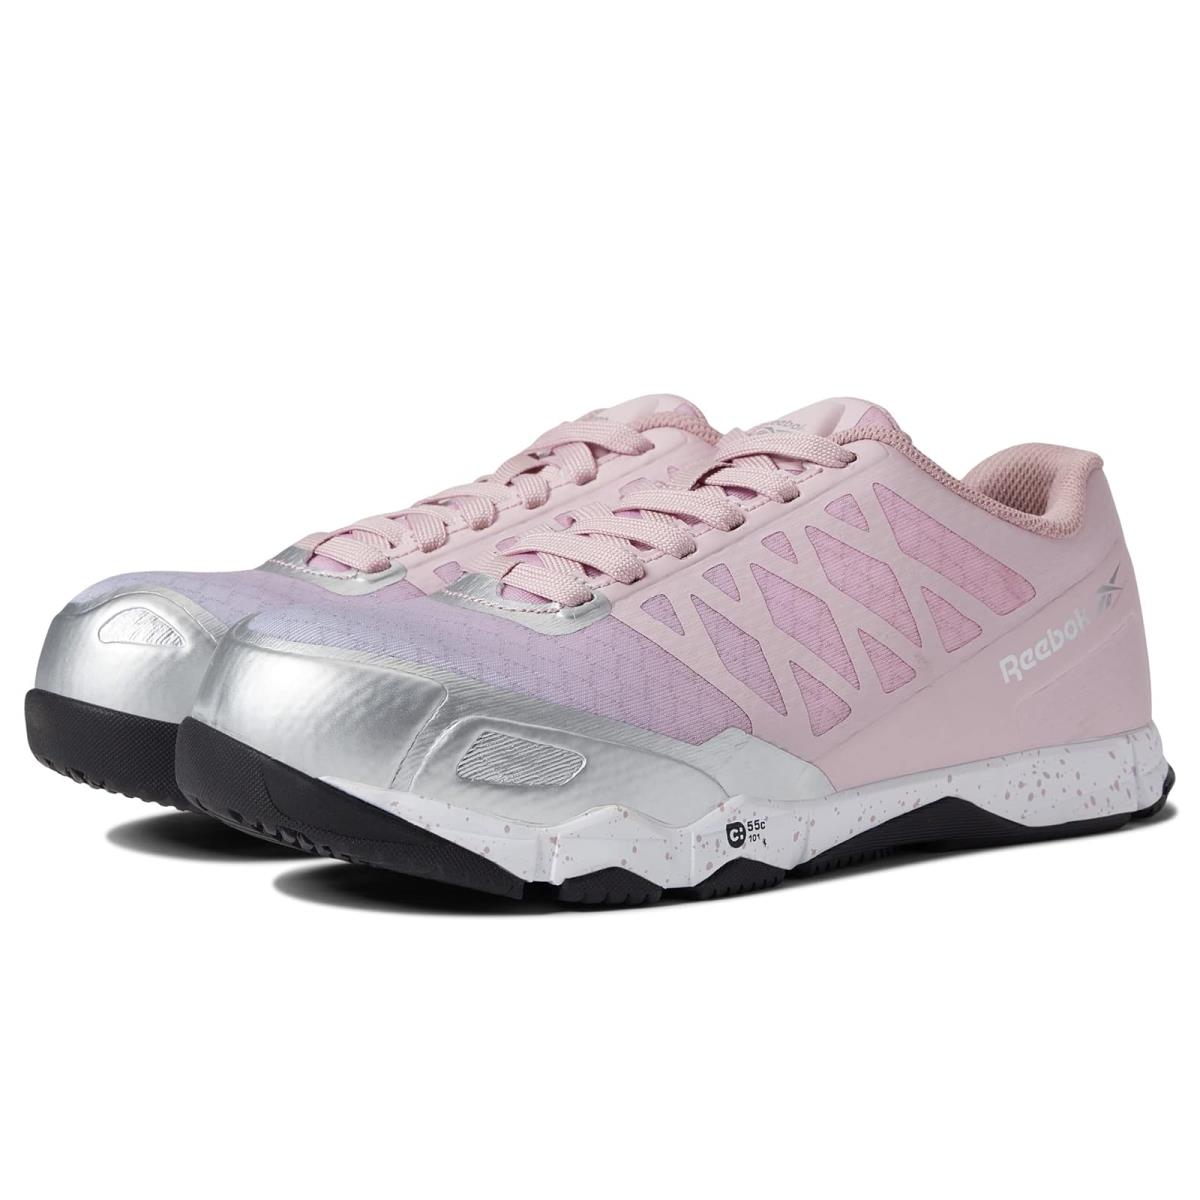 Woman`s Sneakers Athletic Shoes Reebok Work Speed TR Work EH Comp Toe Pink/White